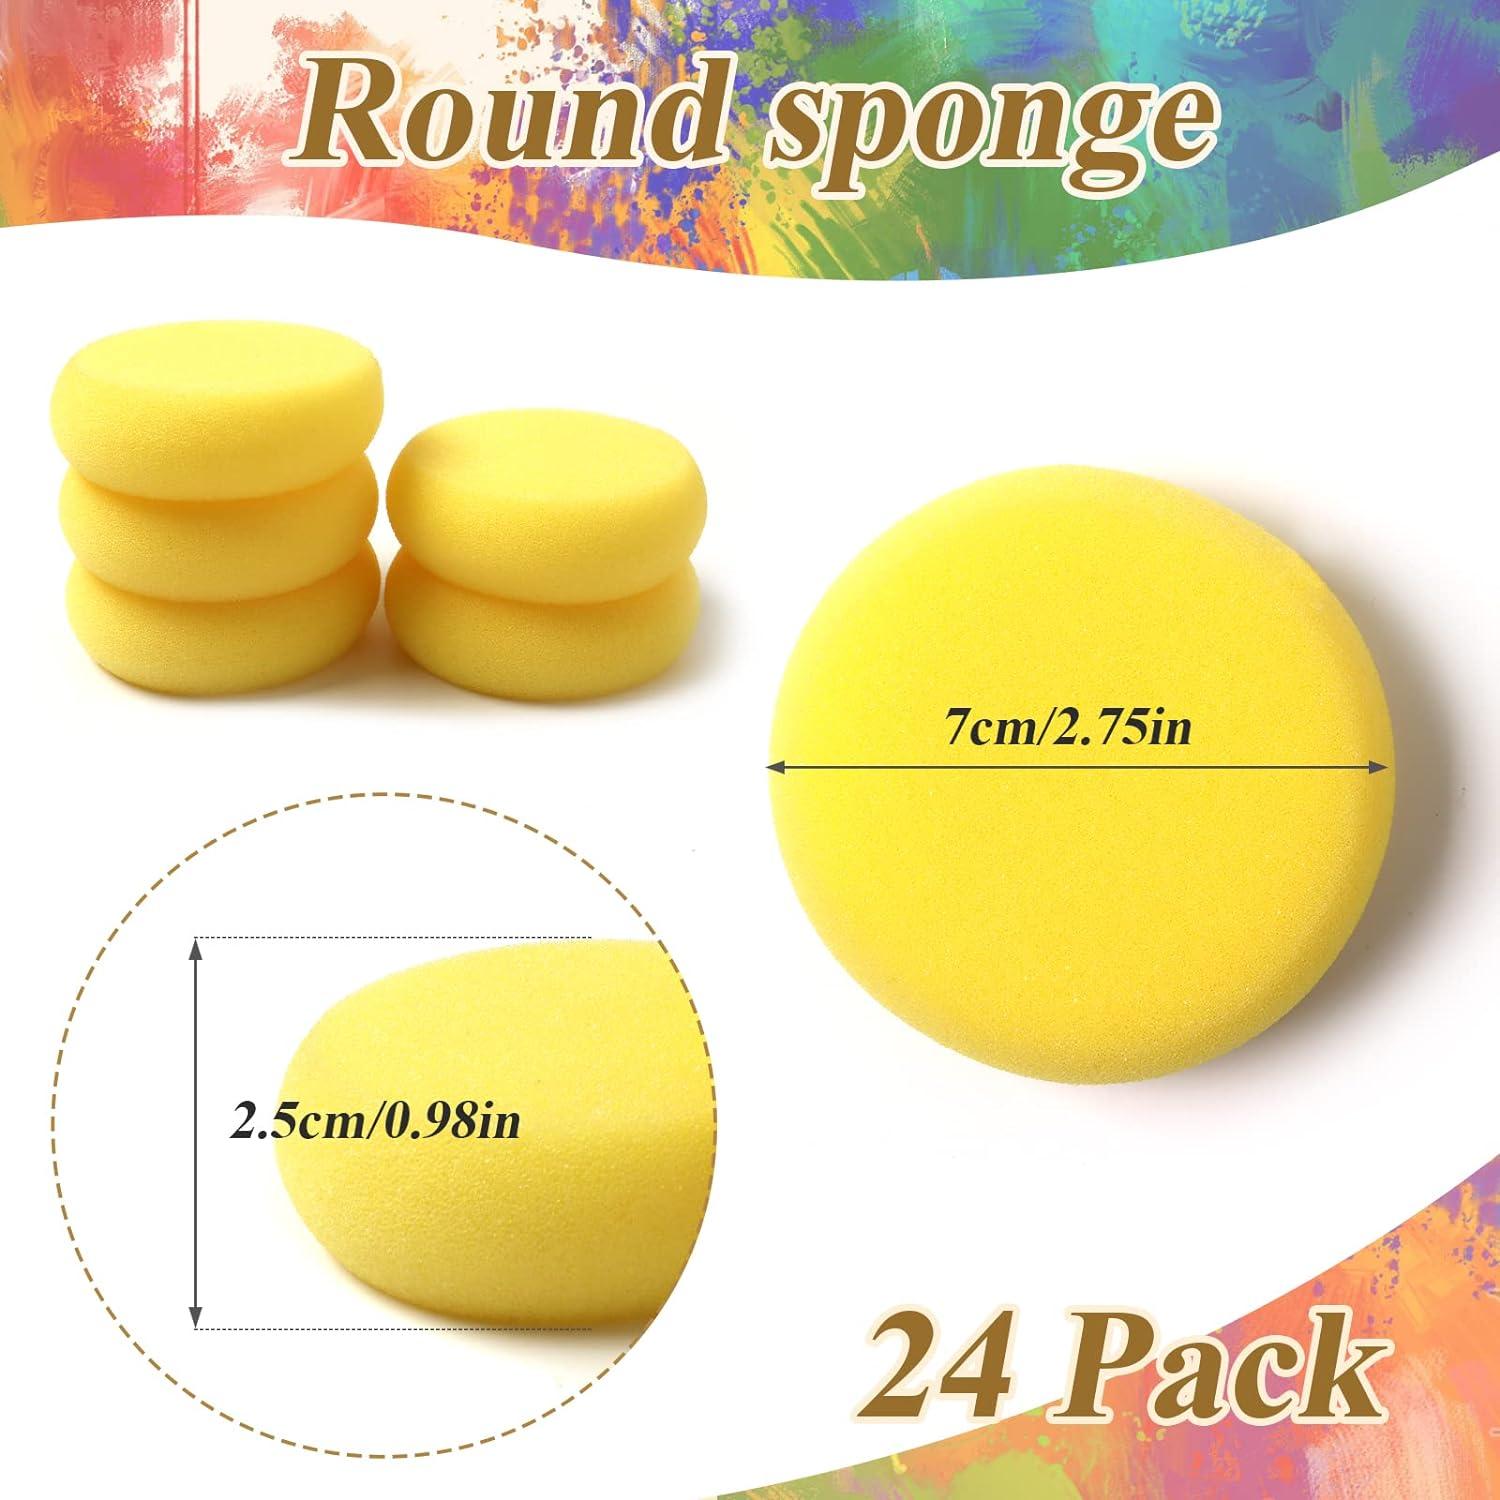 Hapy Shop 24 Pack Painting Sponge Round Synthetic Artist Sponges Watercolor Sponges for Painting Crafts Ceramics Household Use and More 2.8 Inches